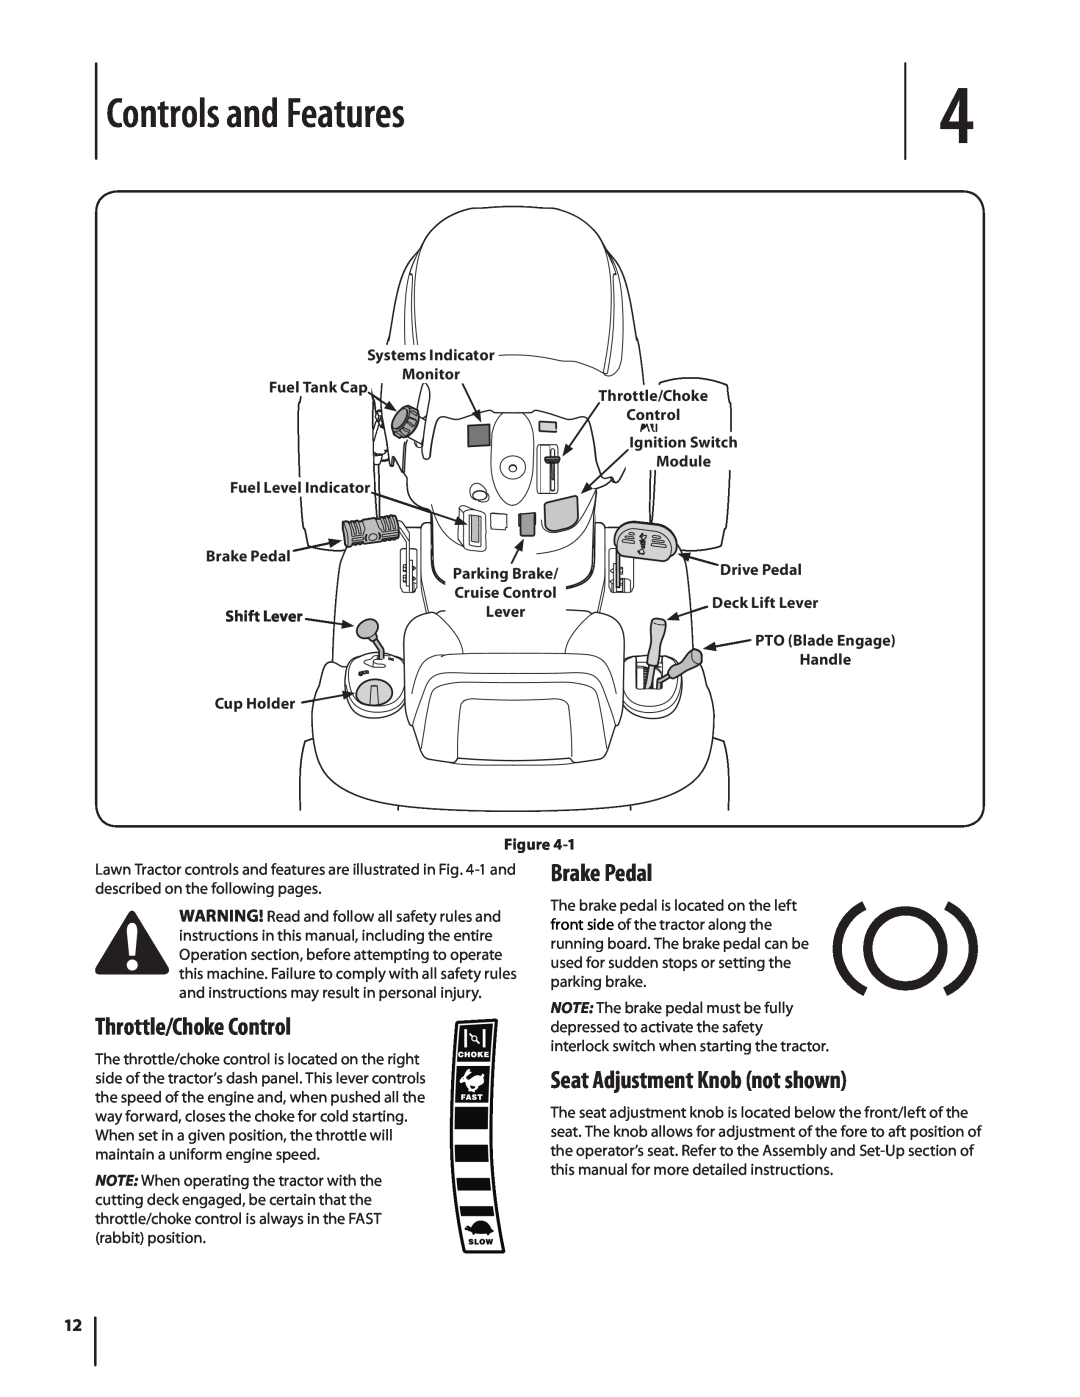 MTD 1742 warranty Controls and Features, Throttle/Choke Control, Brake Pedal, Seat Adjustment Knob not shown 